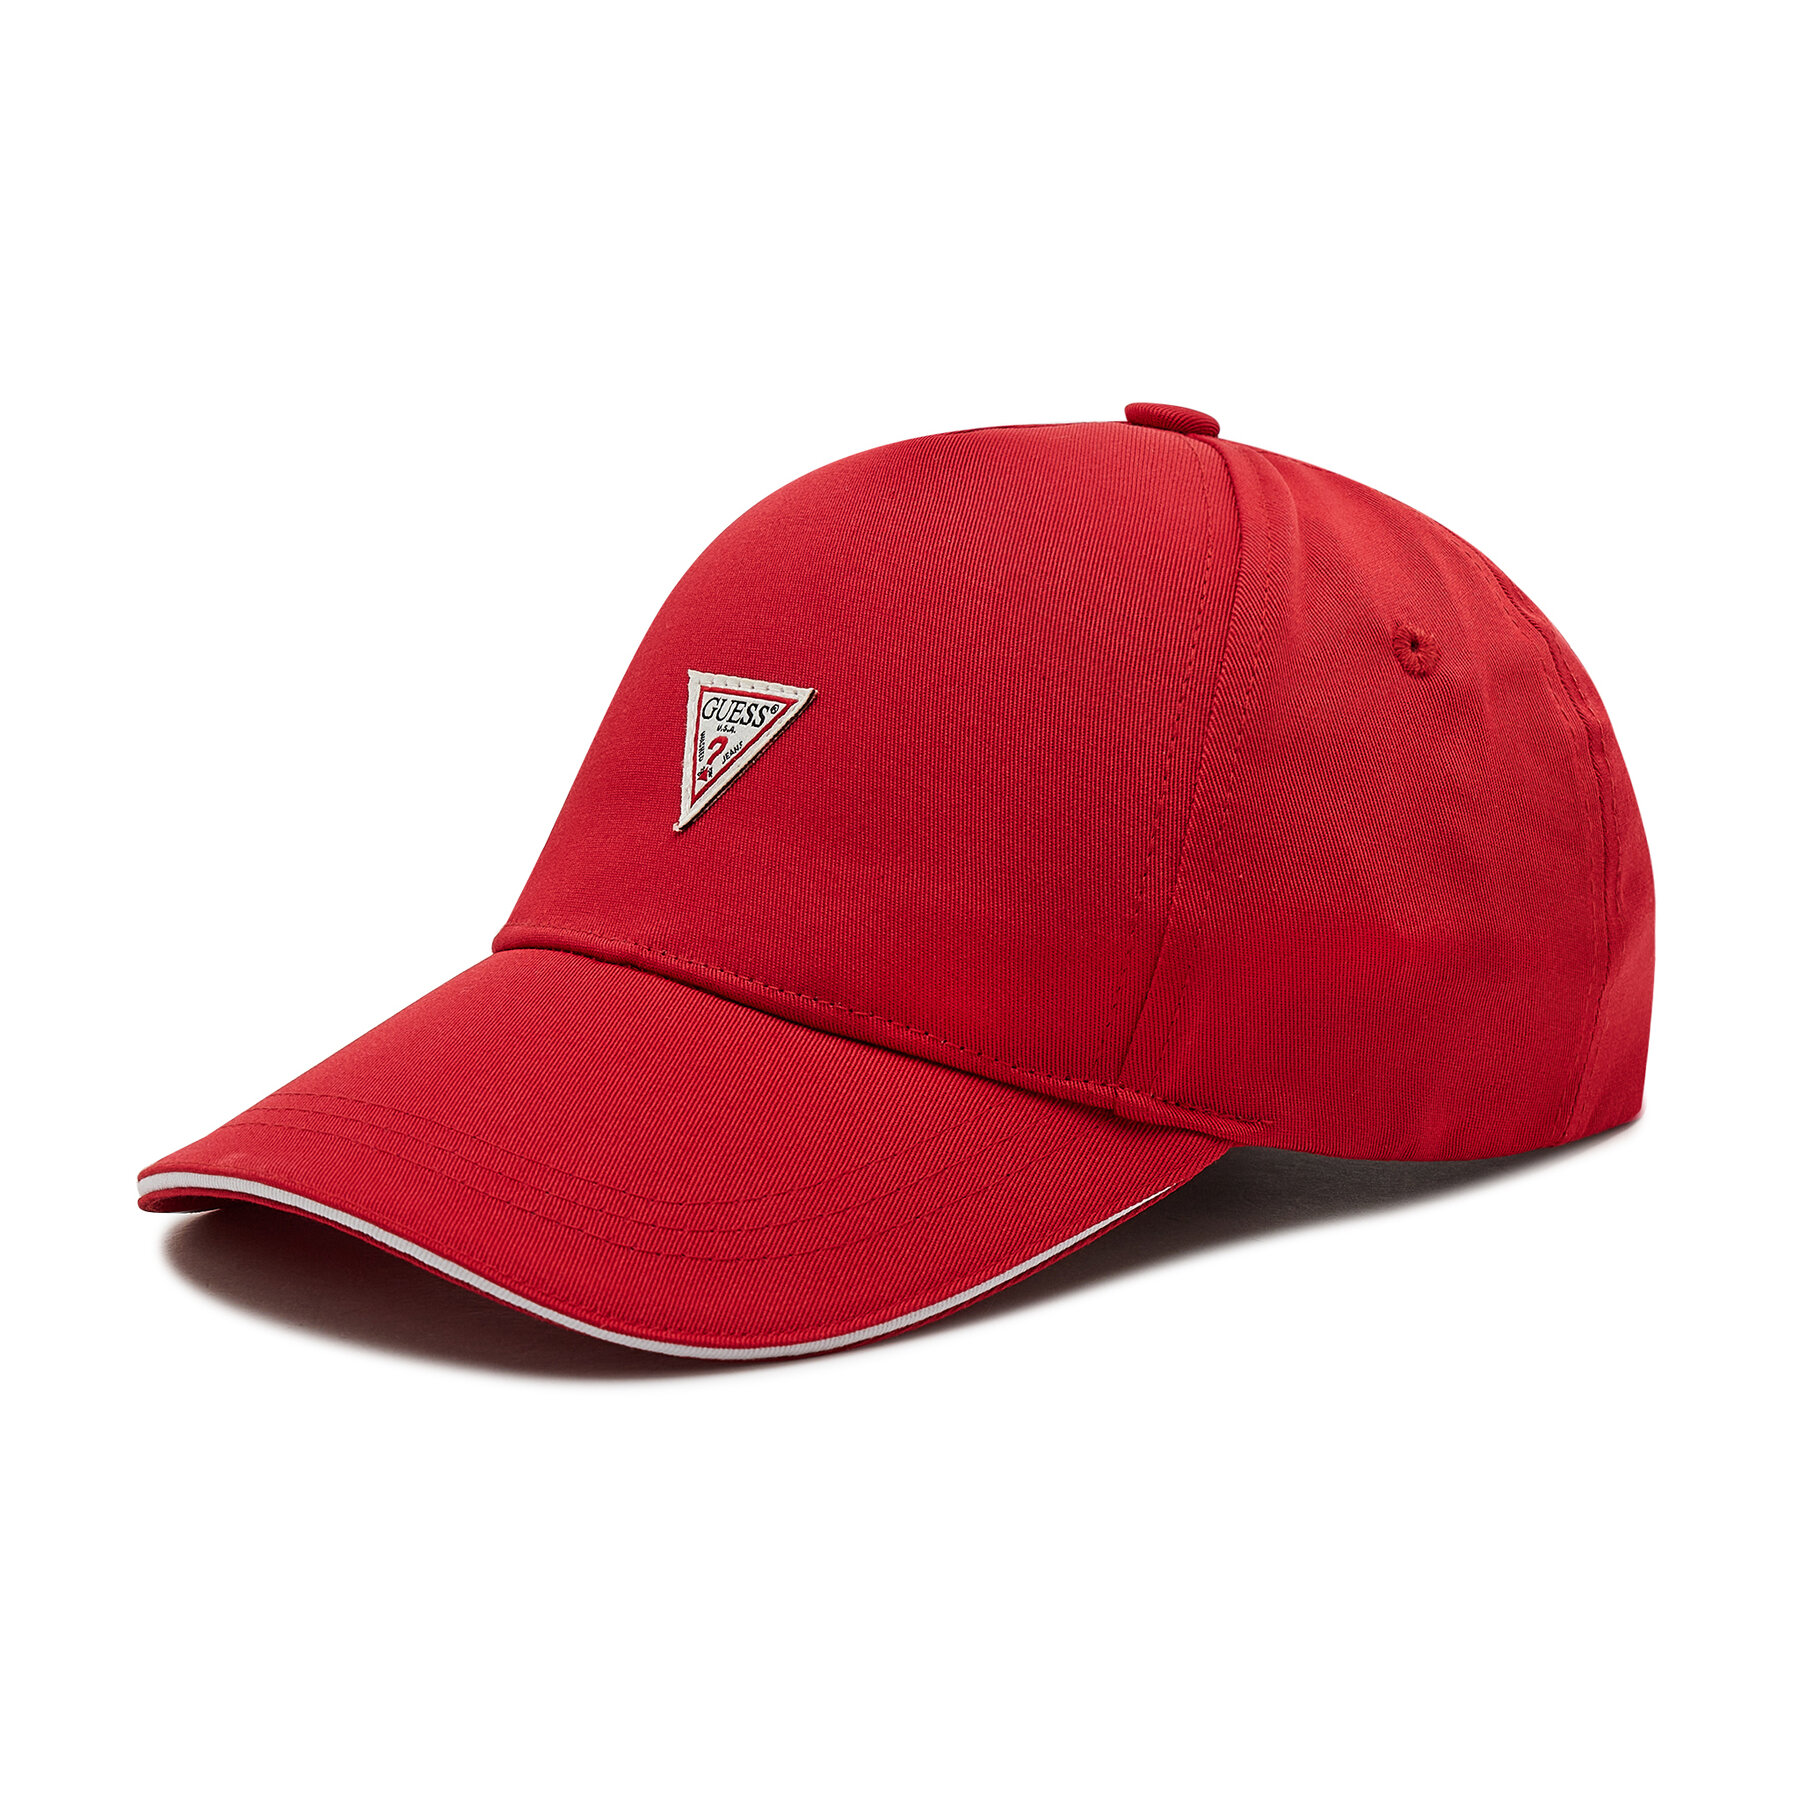 Cap Guess M1BZ57 WBN60 CHILI RED von Guess